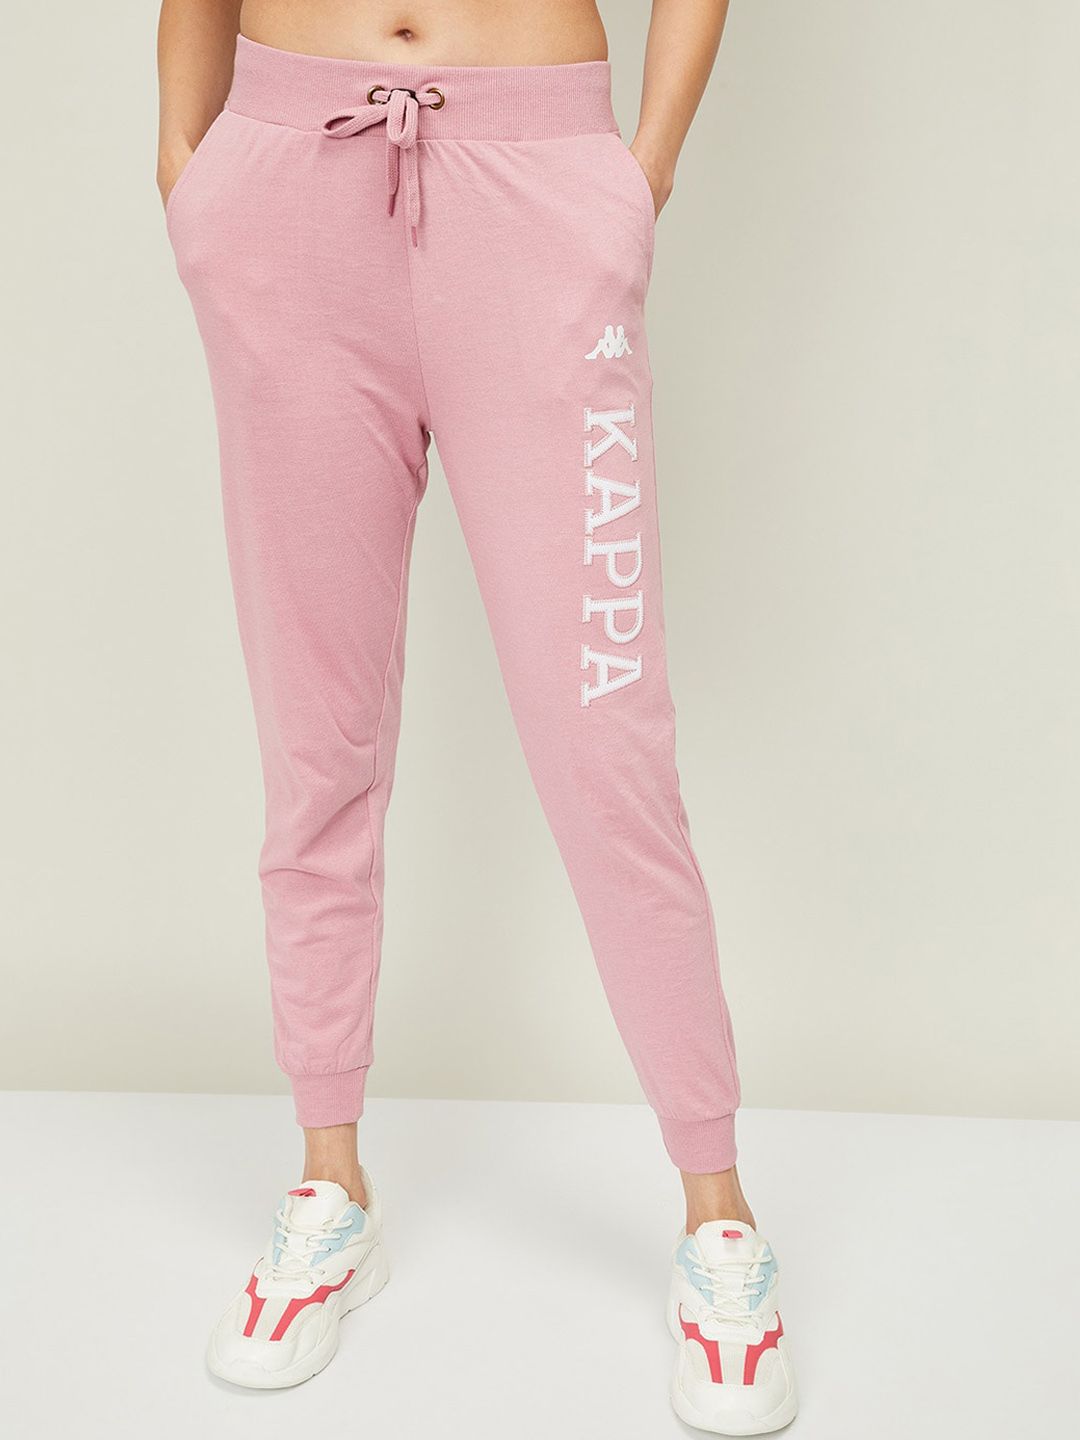 Kappa Women Pink Solid Cotton Joggers Price in India